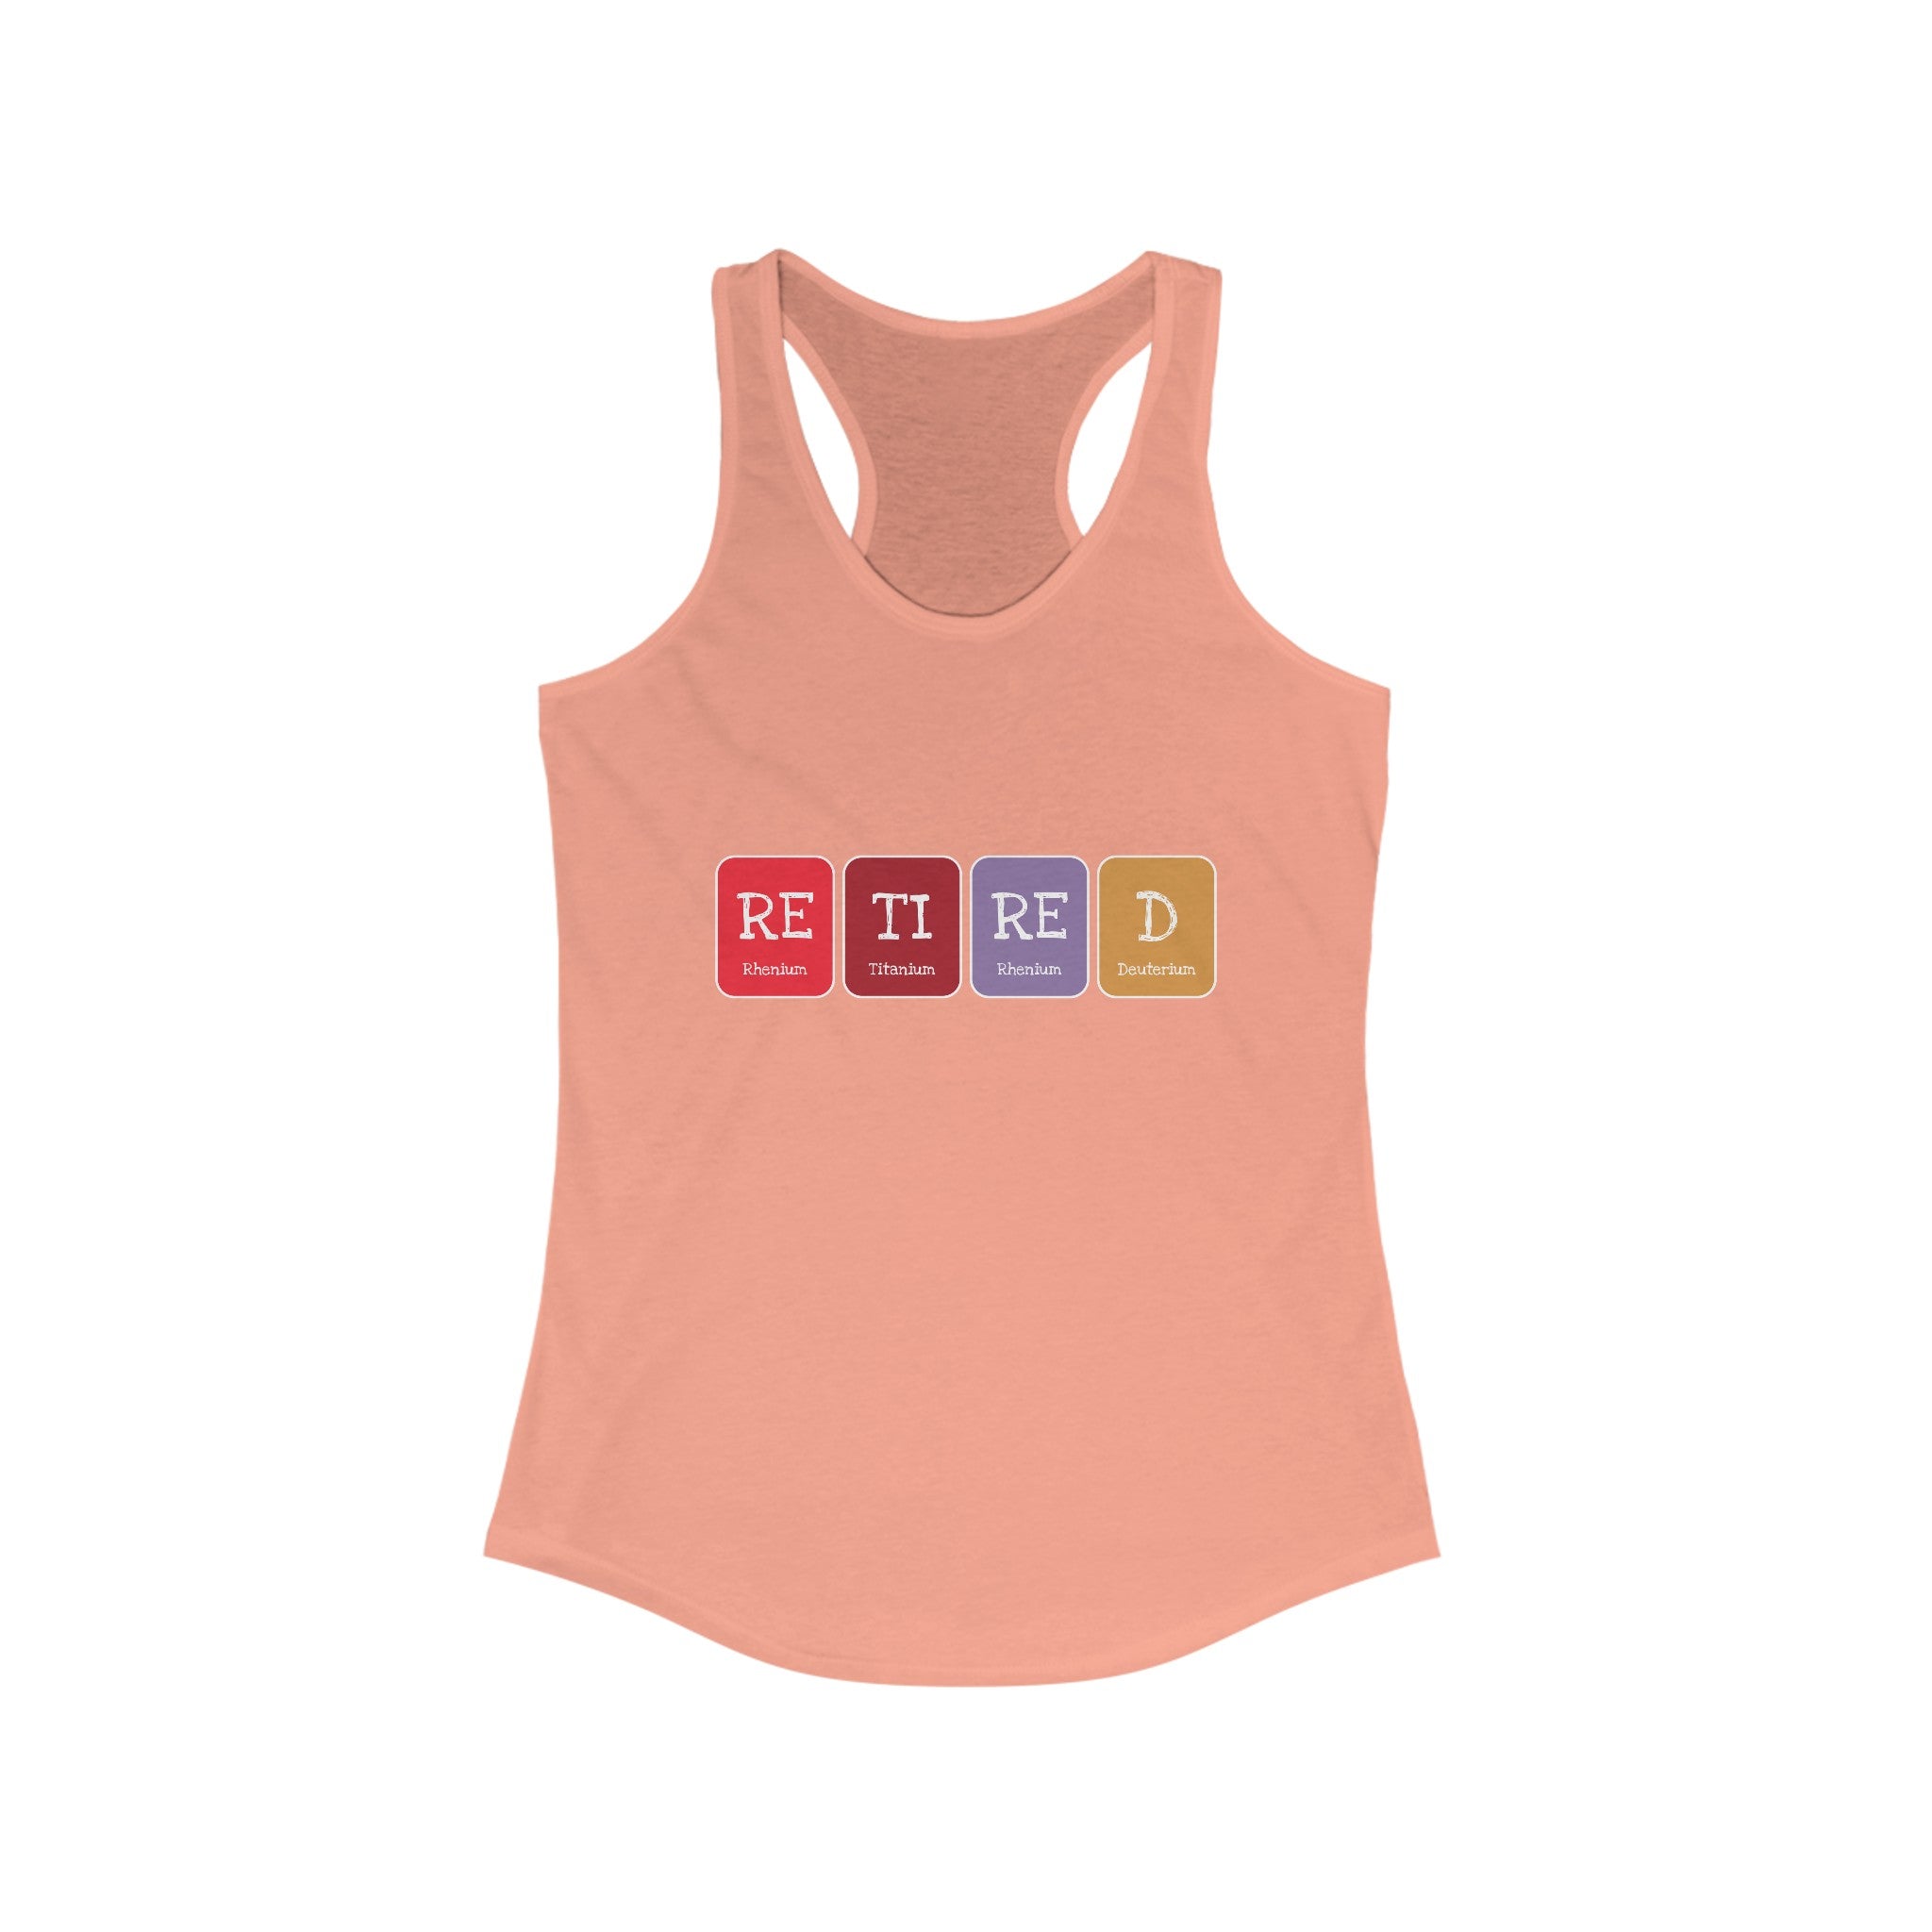 Retired - Women's Racerback Tank with the word "RETIRED" displayed using elements from the periodic table: Rhenium (Re), Titanium (Ti), Rhenium (Re), and Dubnium (D). Designed in an active style, this ultra-lightweight top is perfect for a relaxed yet sporty look.